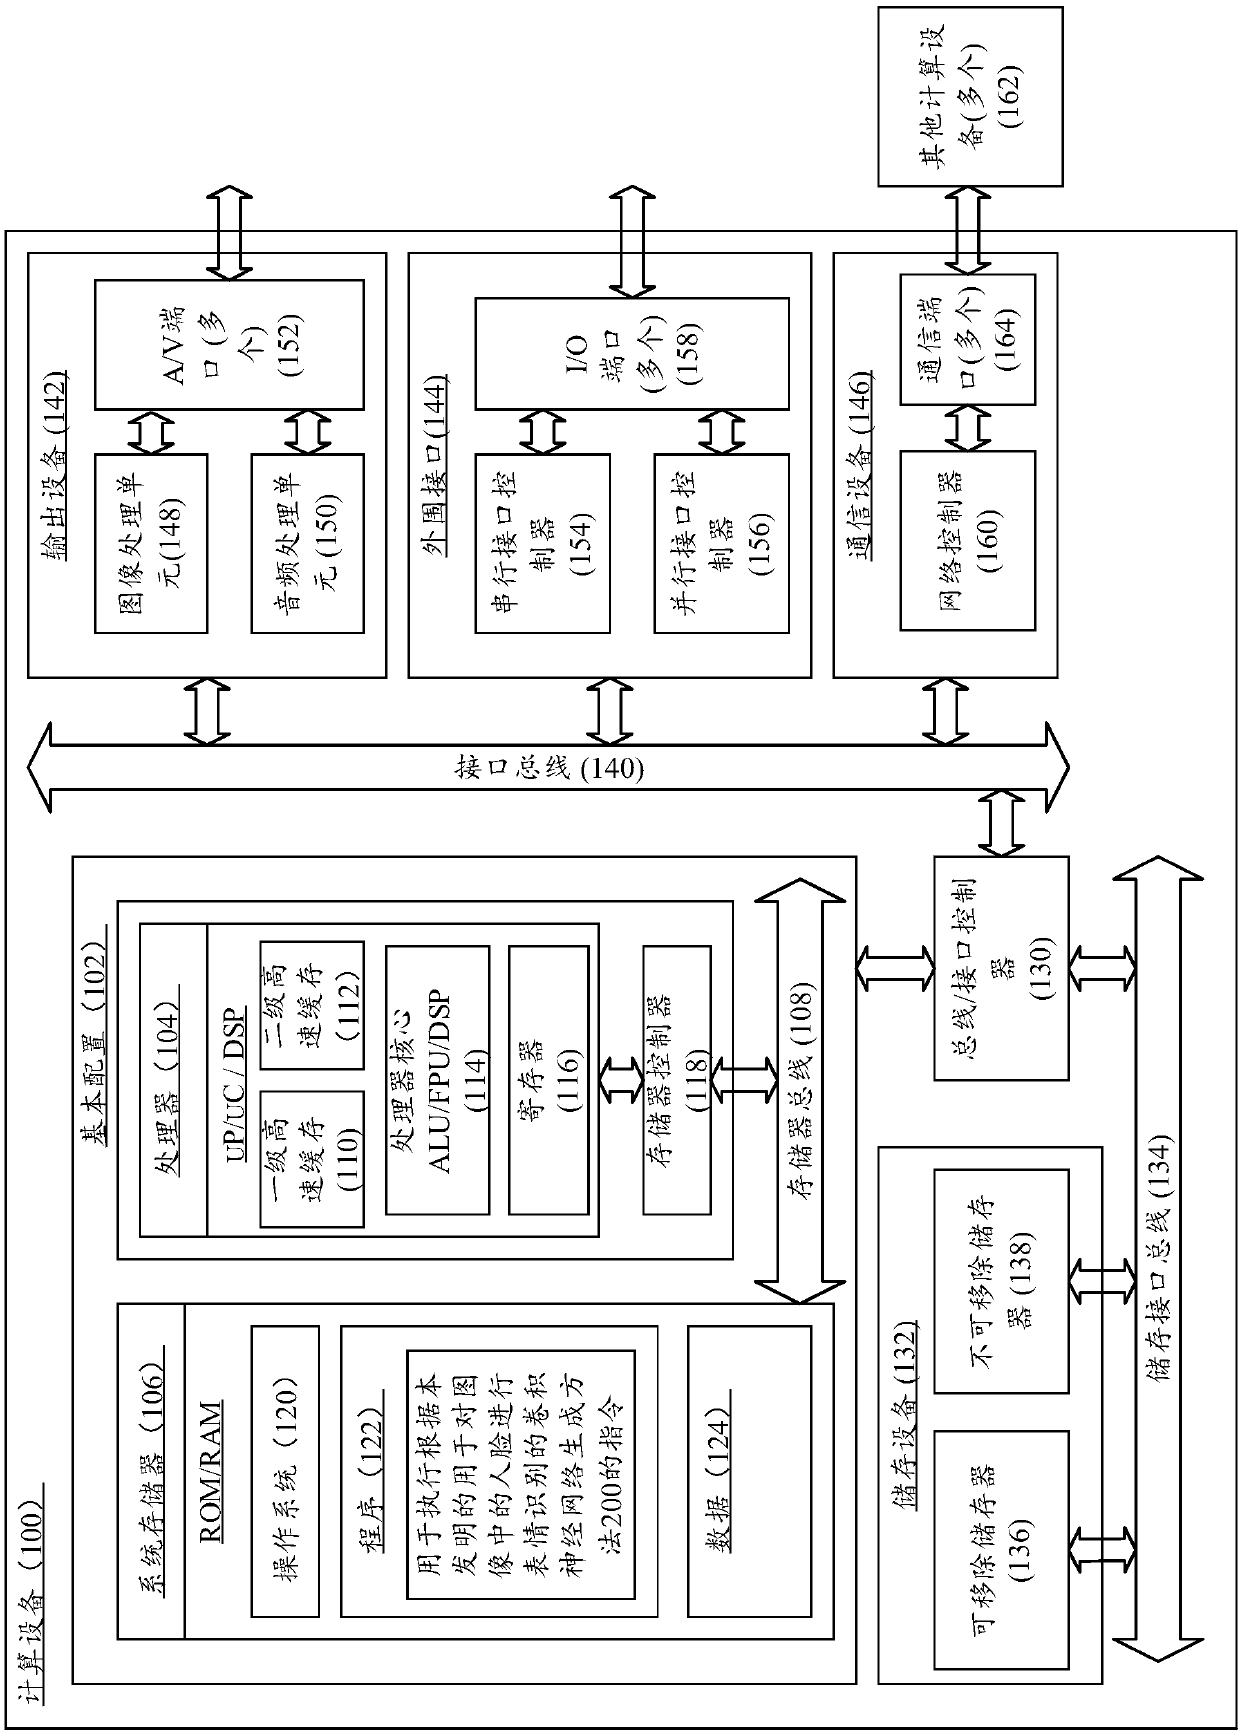 Generation method of convolutional neural networks and expression recognition method